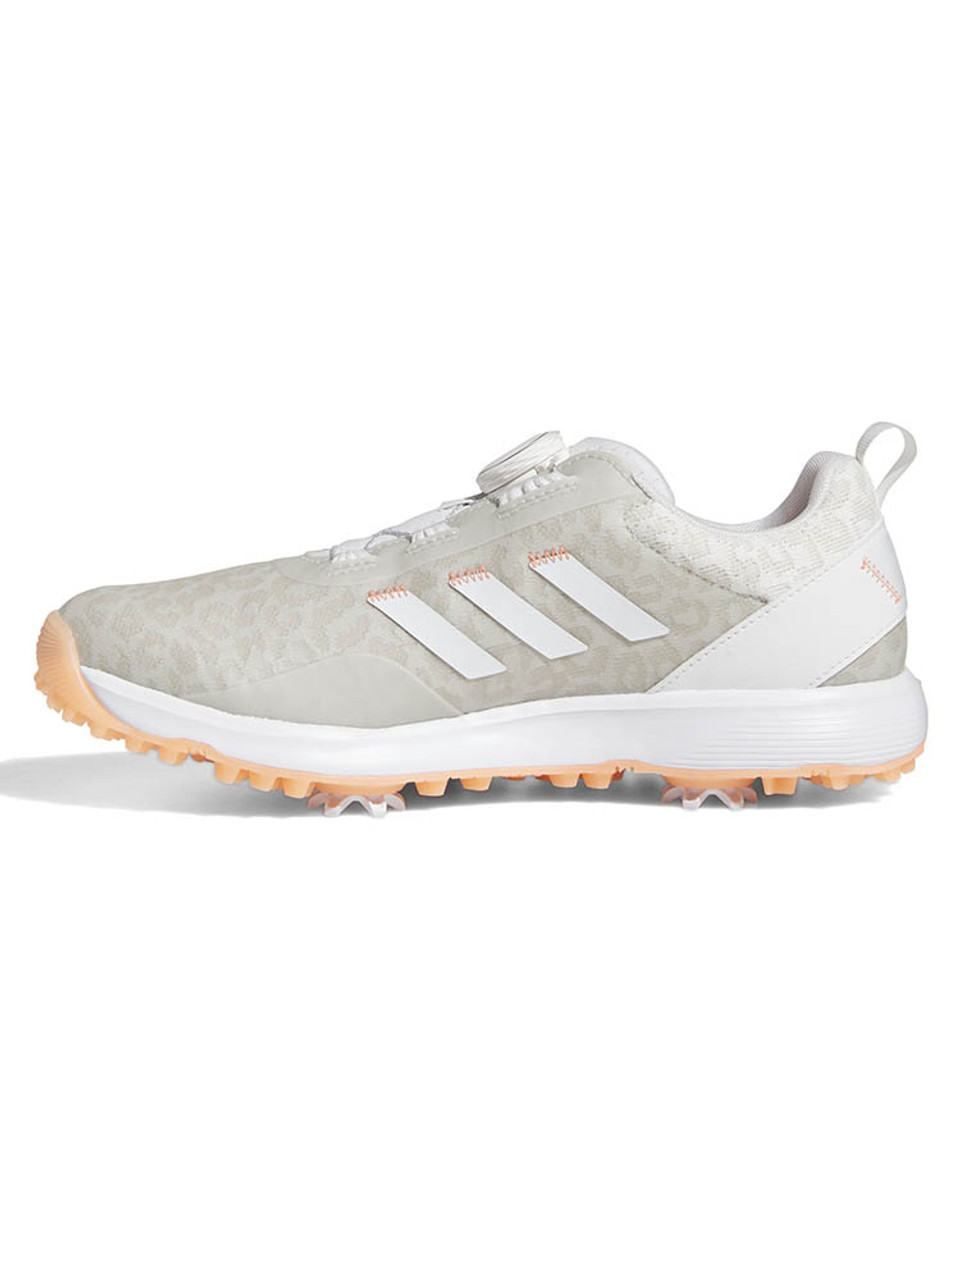 adidas Women's S2G BOA Golf Shoes - Ftwr White/Ftwr White/Coral Fusion ...